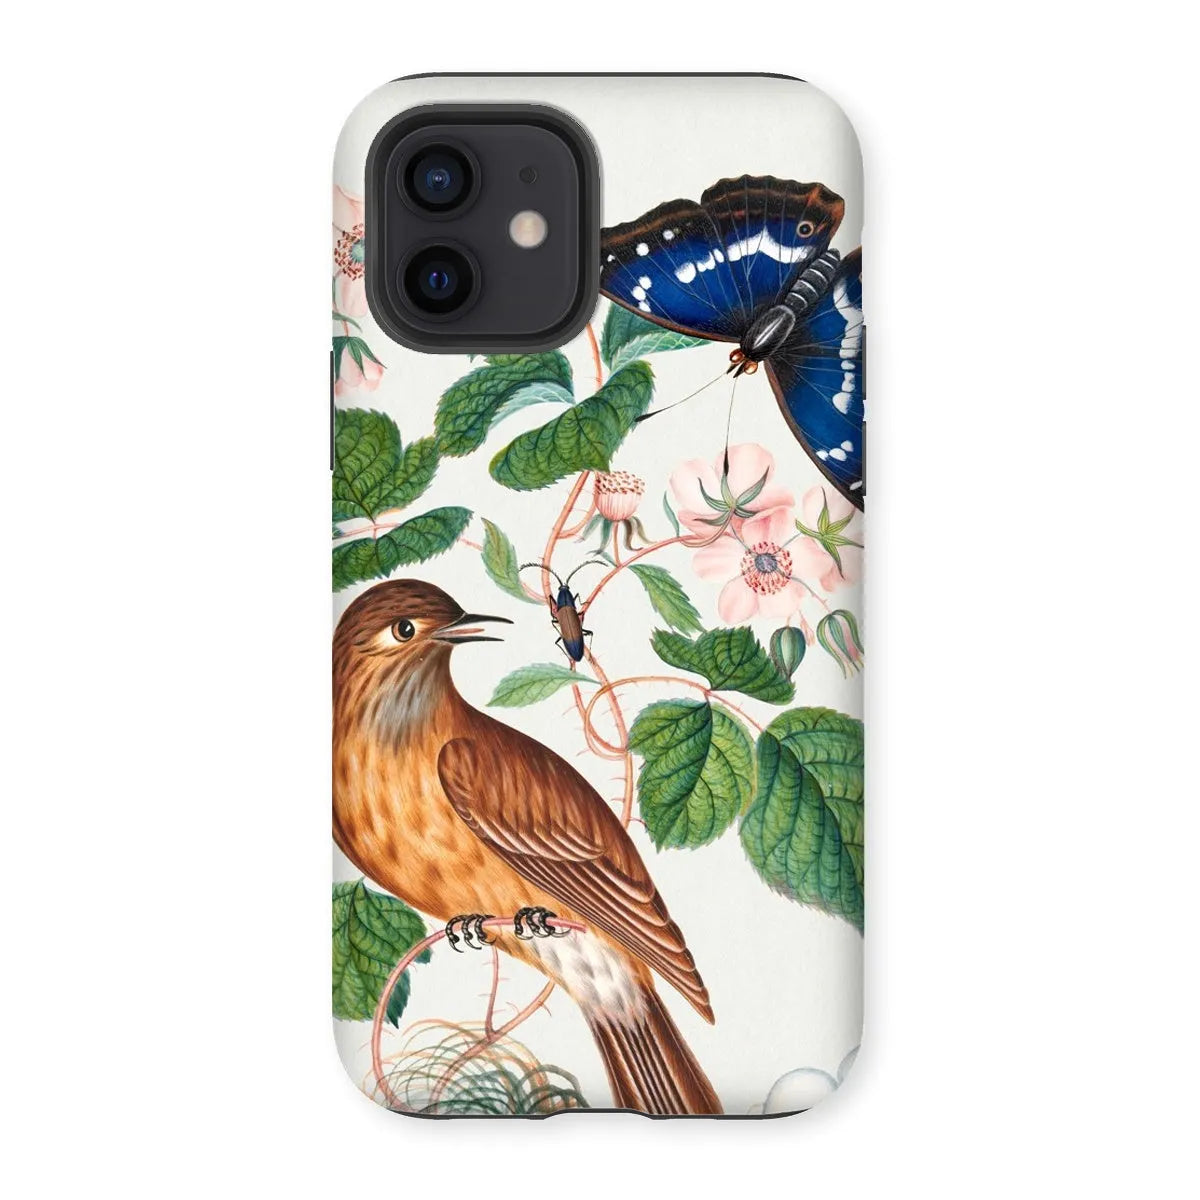 Flycatcher Emperor And Beetle - Art Phone Case - James Bolton - Iphone 12 / Matte - Mobile Phone Cases - Aesthetic Art